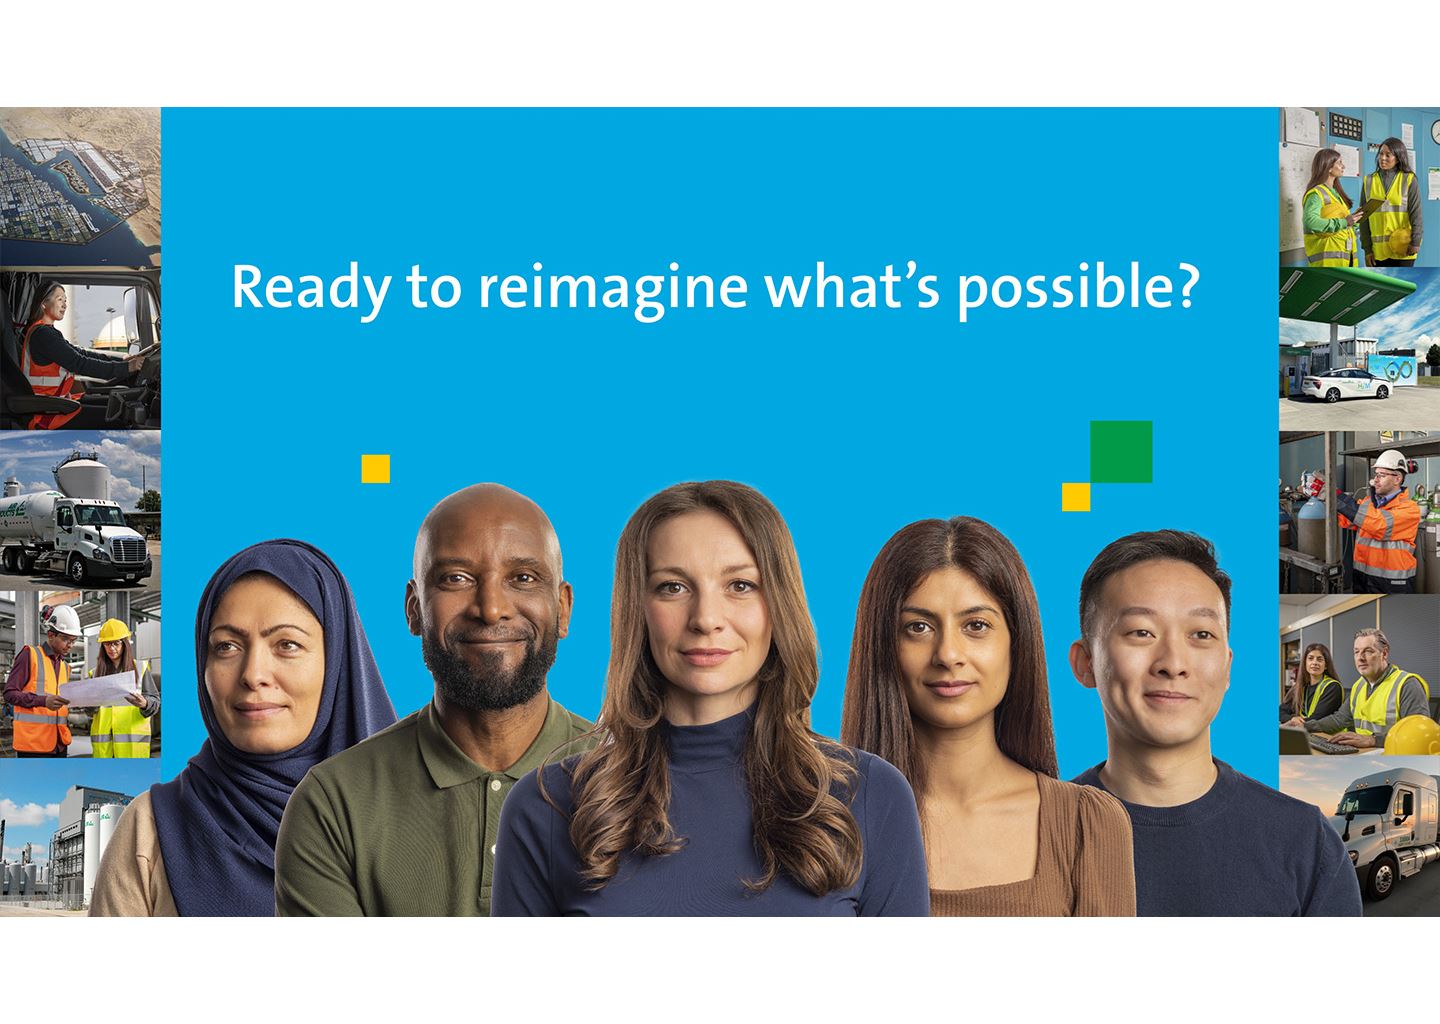 Diverse group of employees | Ready to reimagine what's possible?